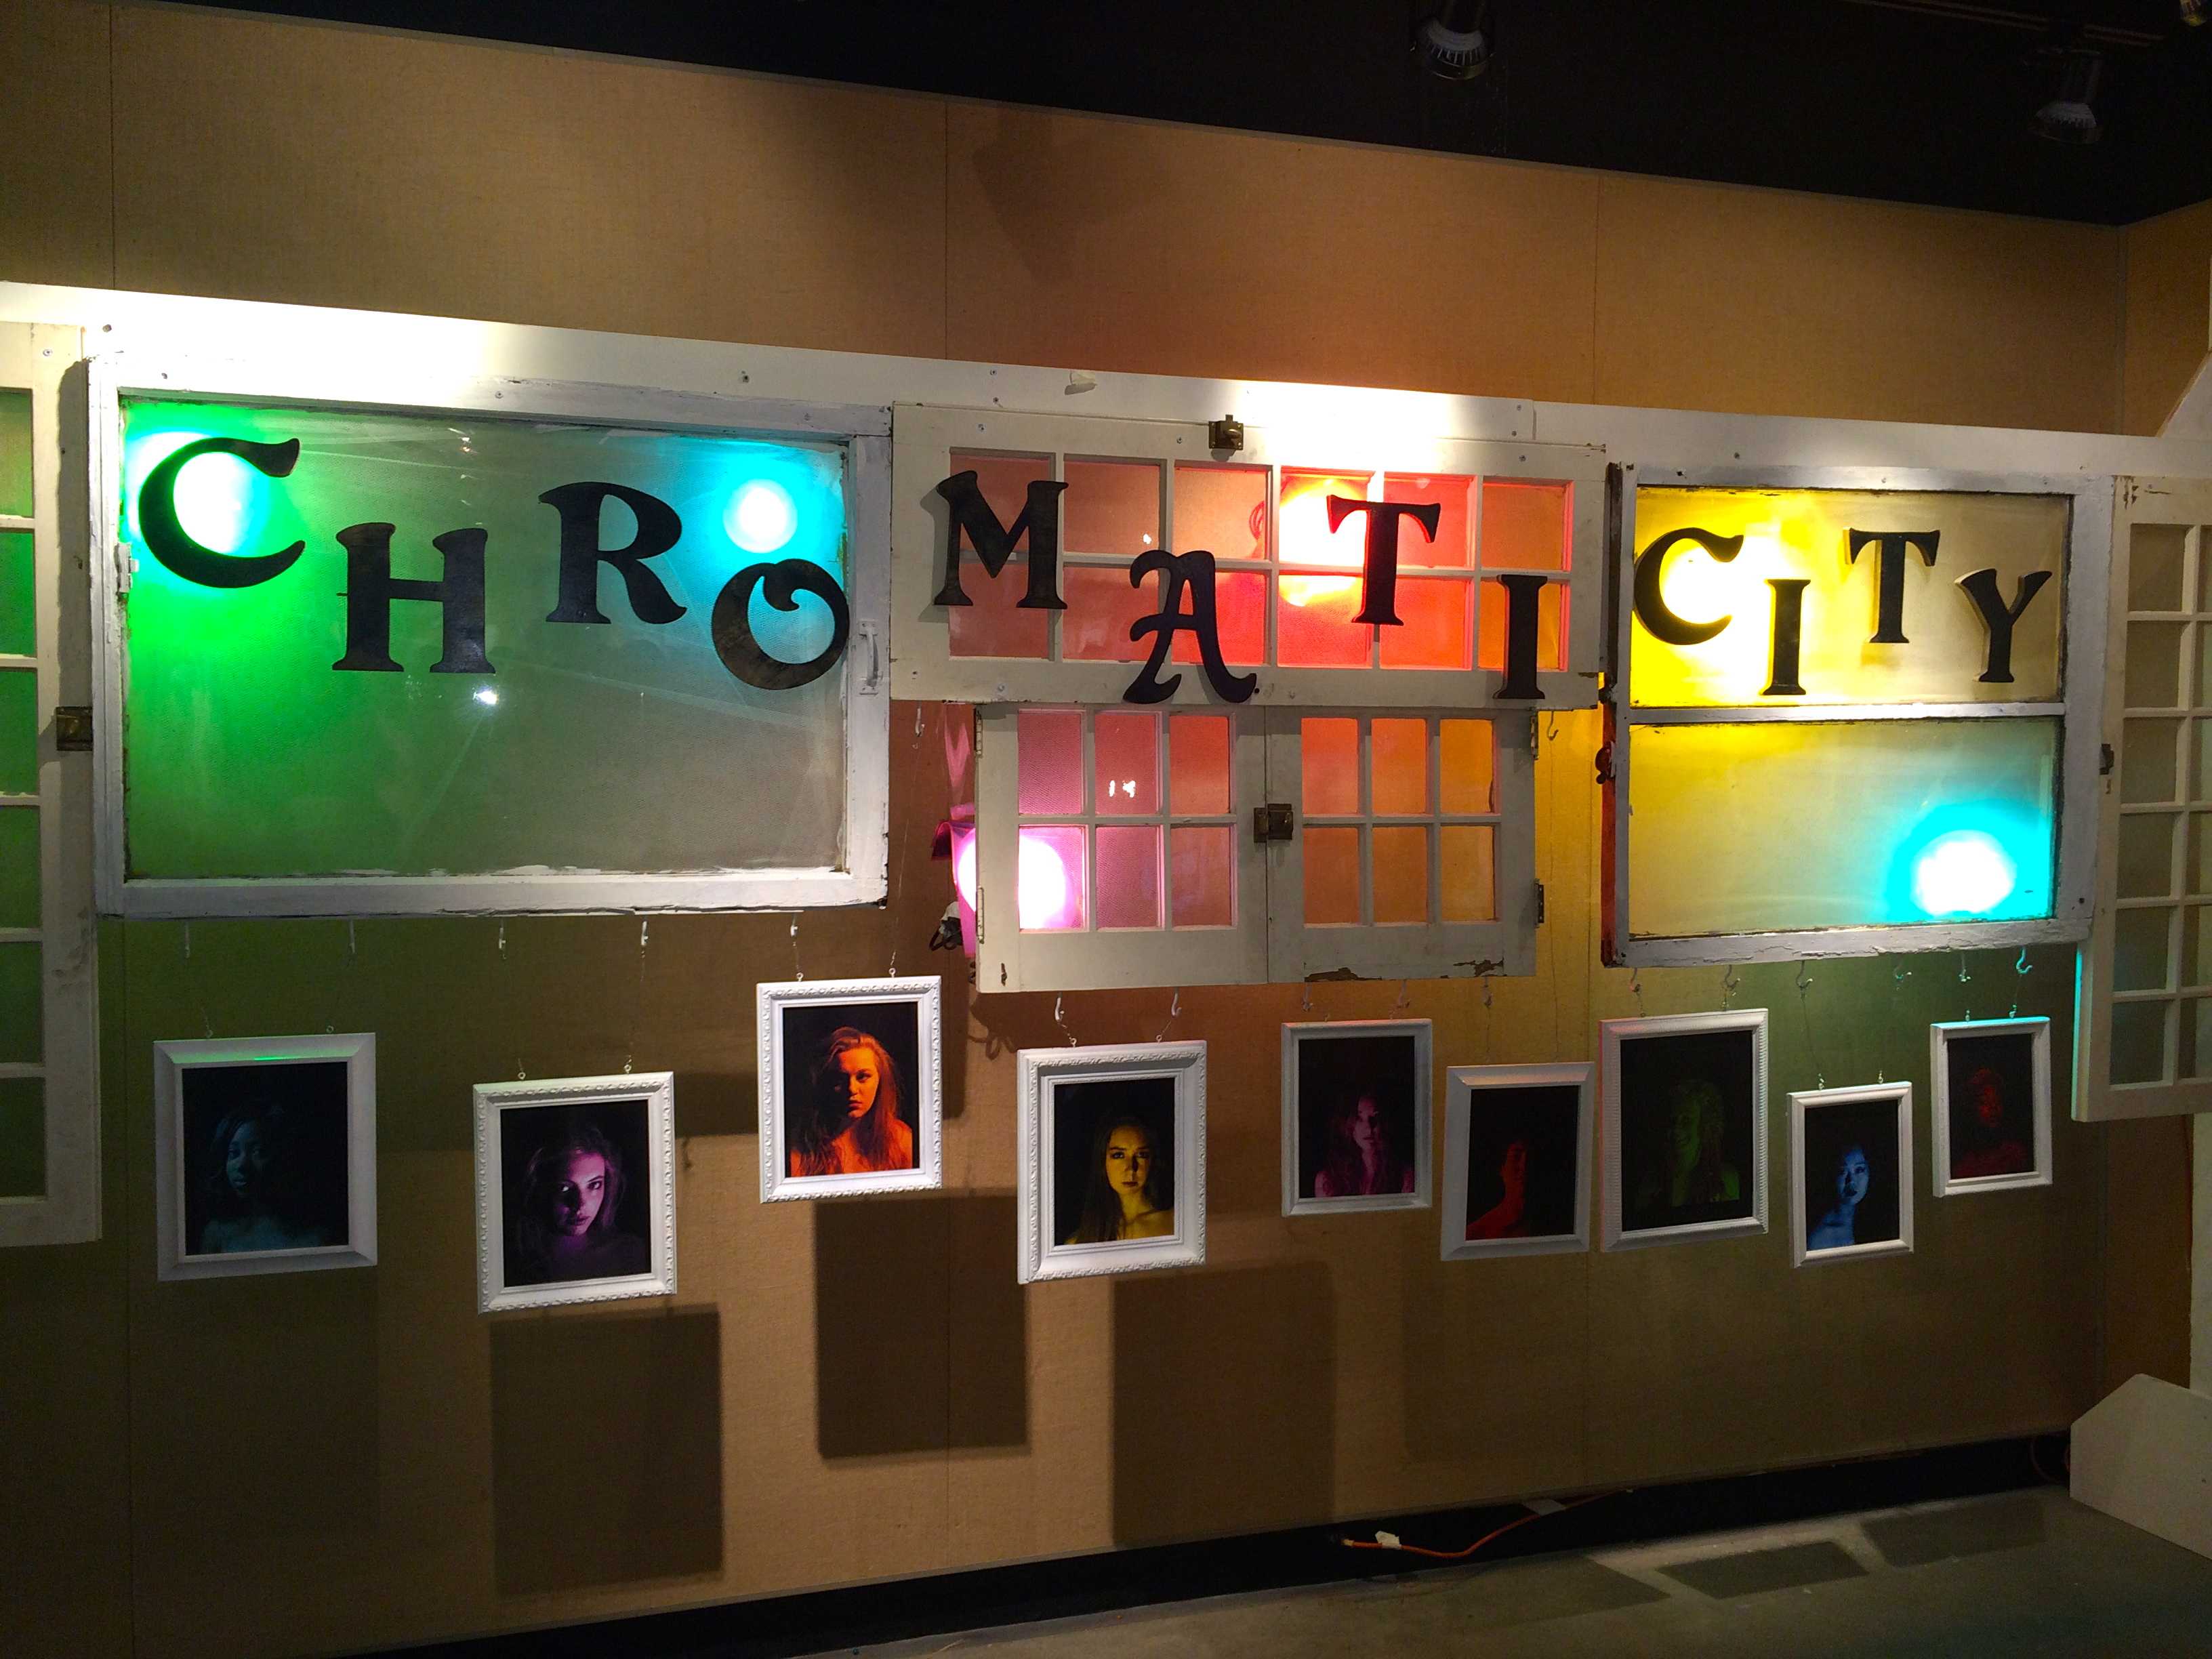 The opening display for the latest VA gallery, Chromaticity. 